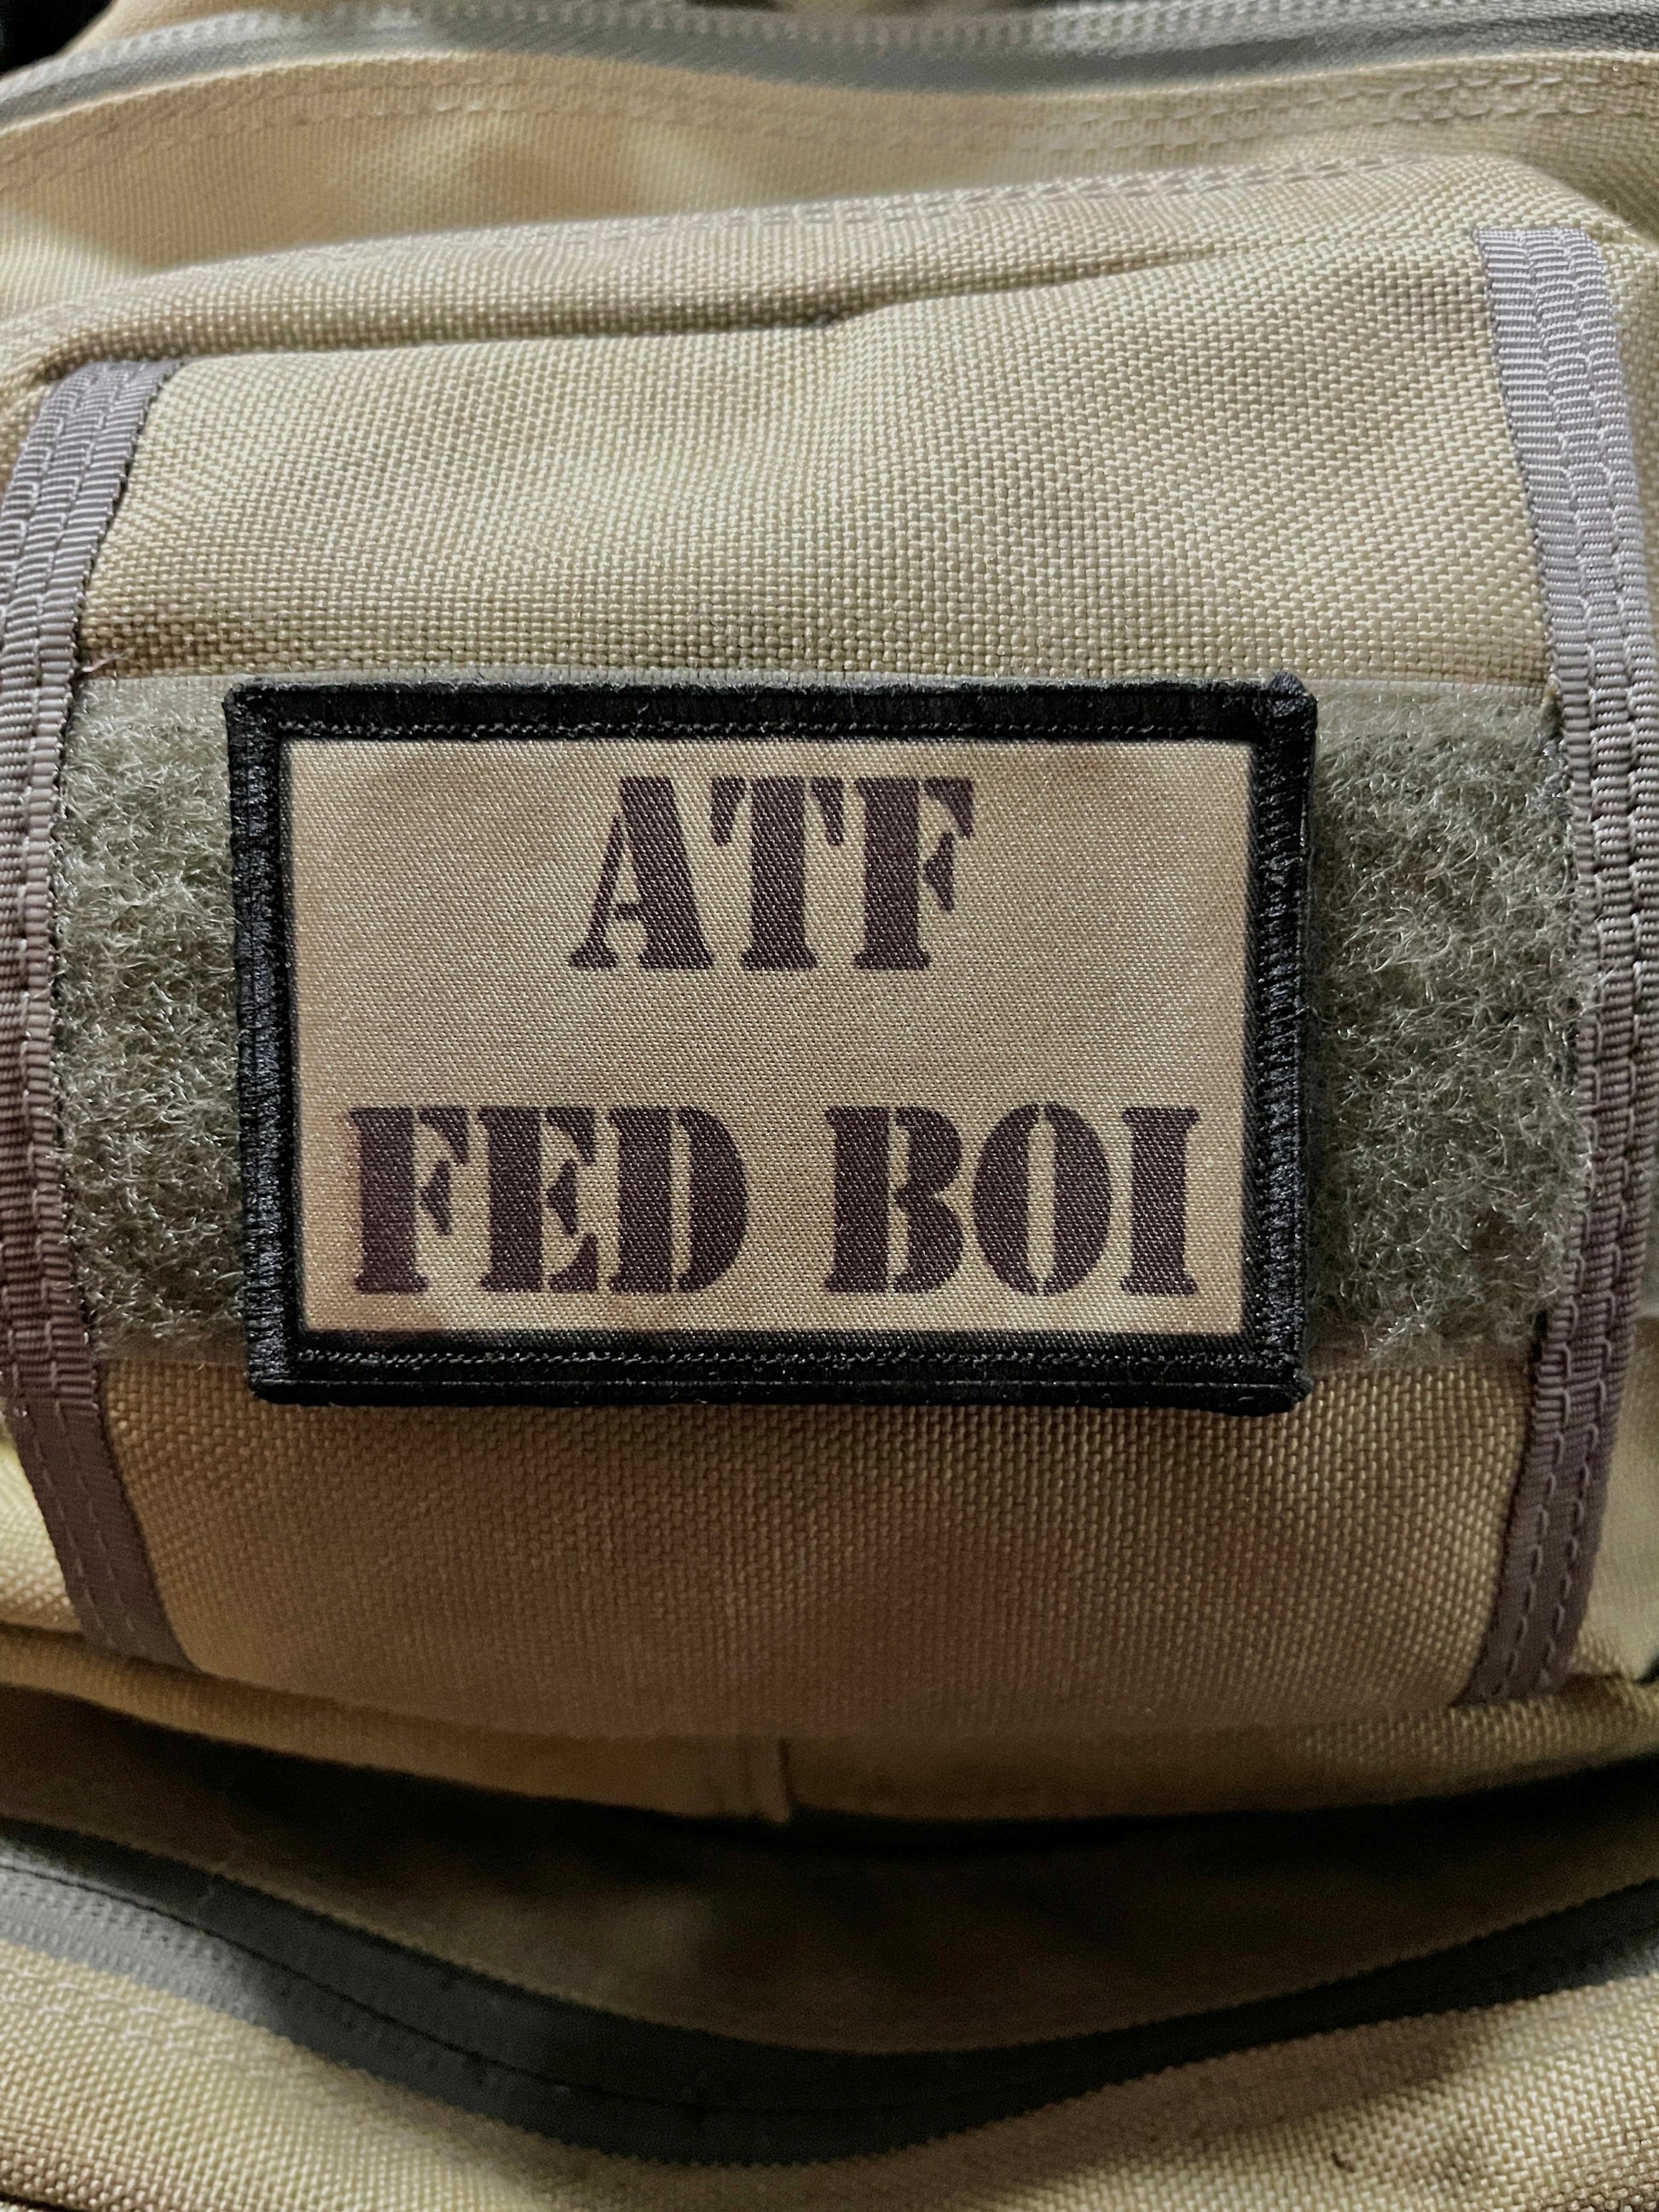 ATF Fed Boi Morale Patch Morale Patches Redheaded T Shirts 